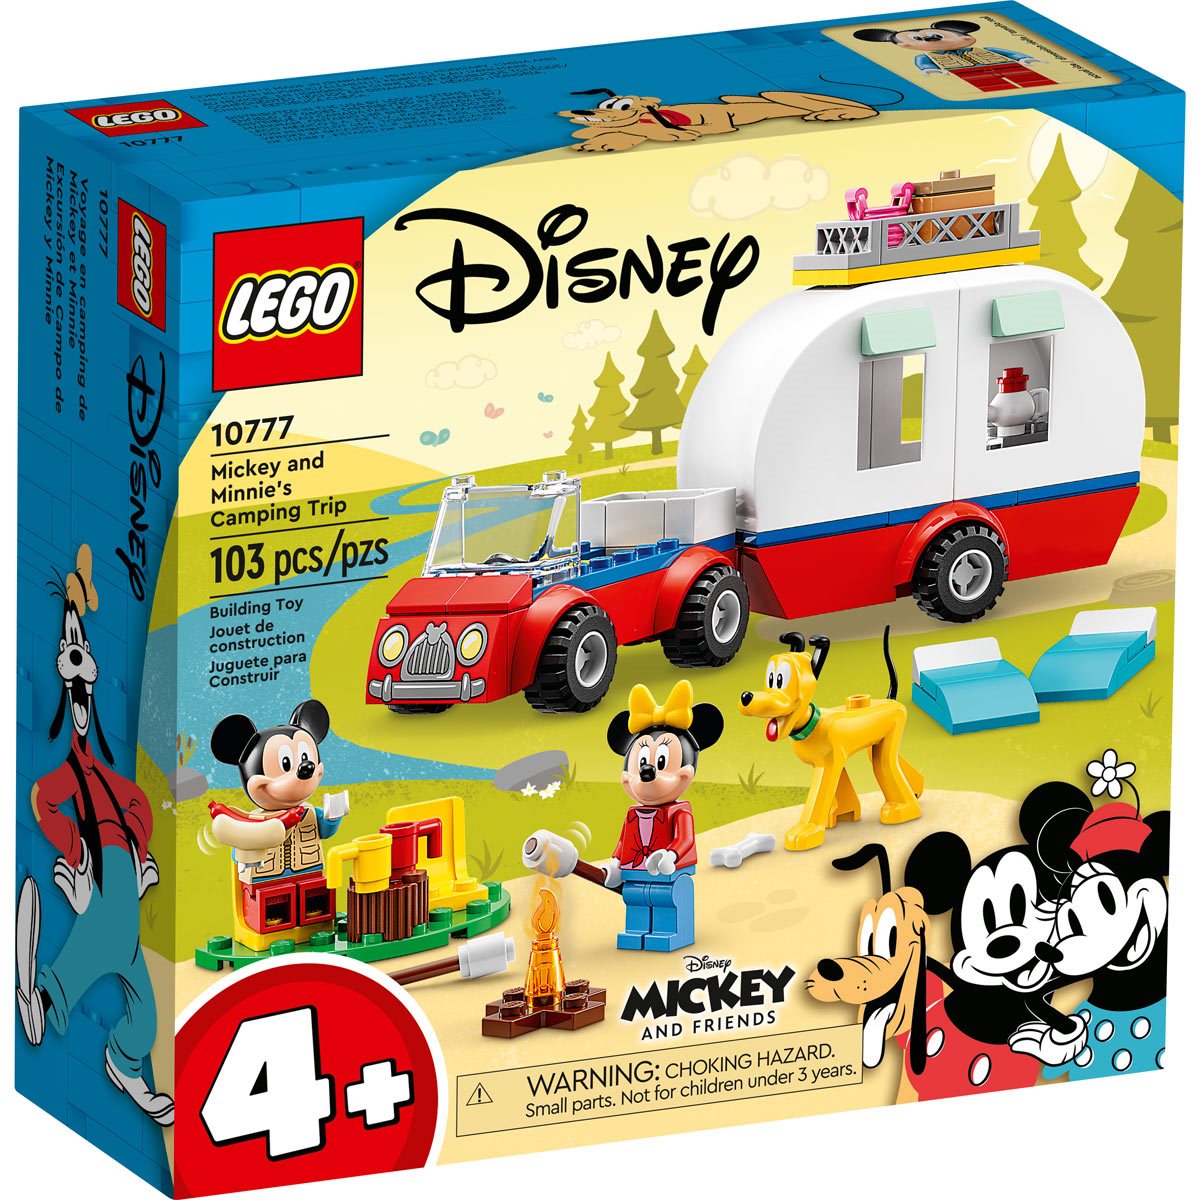 LEGO Disney Mickey and Friends Mickey Mouse and Minnie Mouse Camping Trip 10777